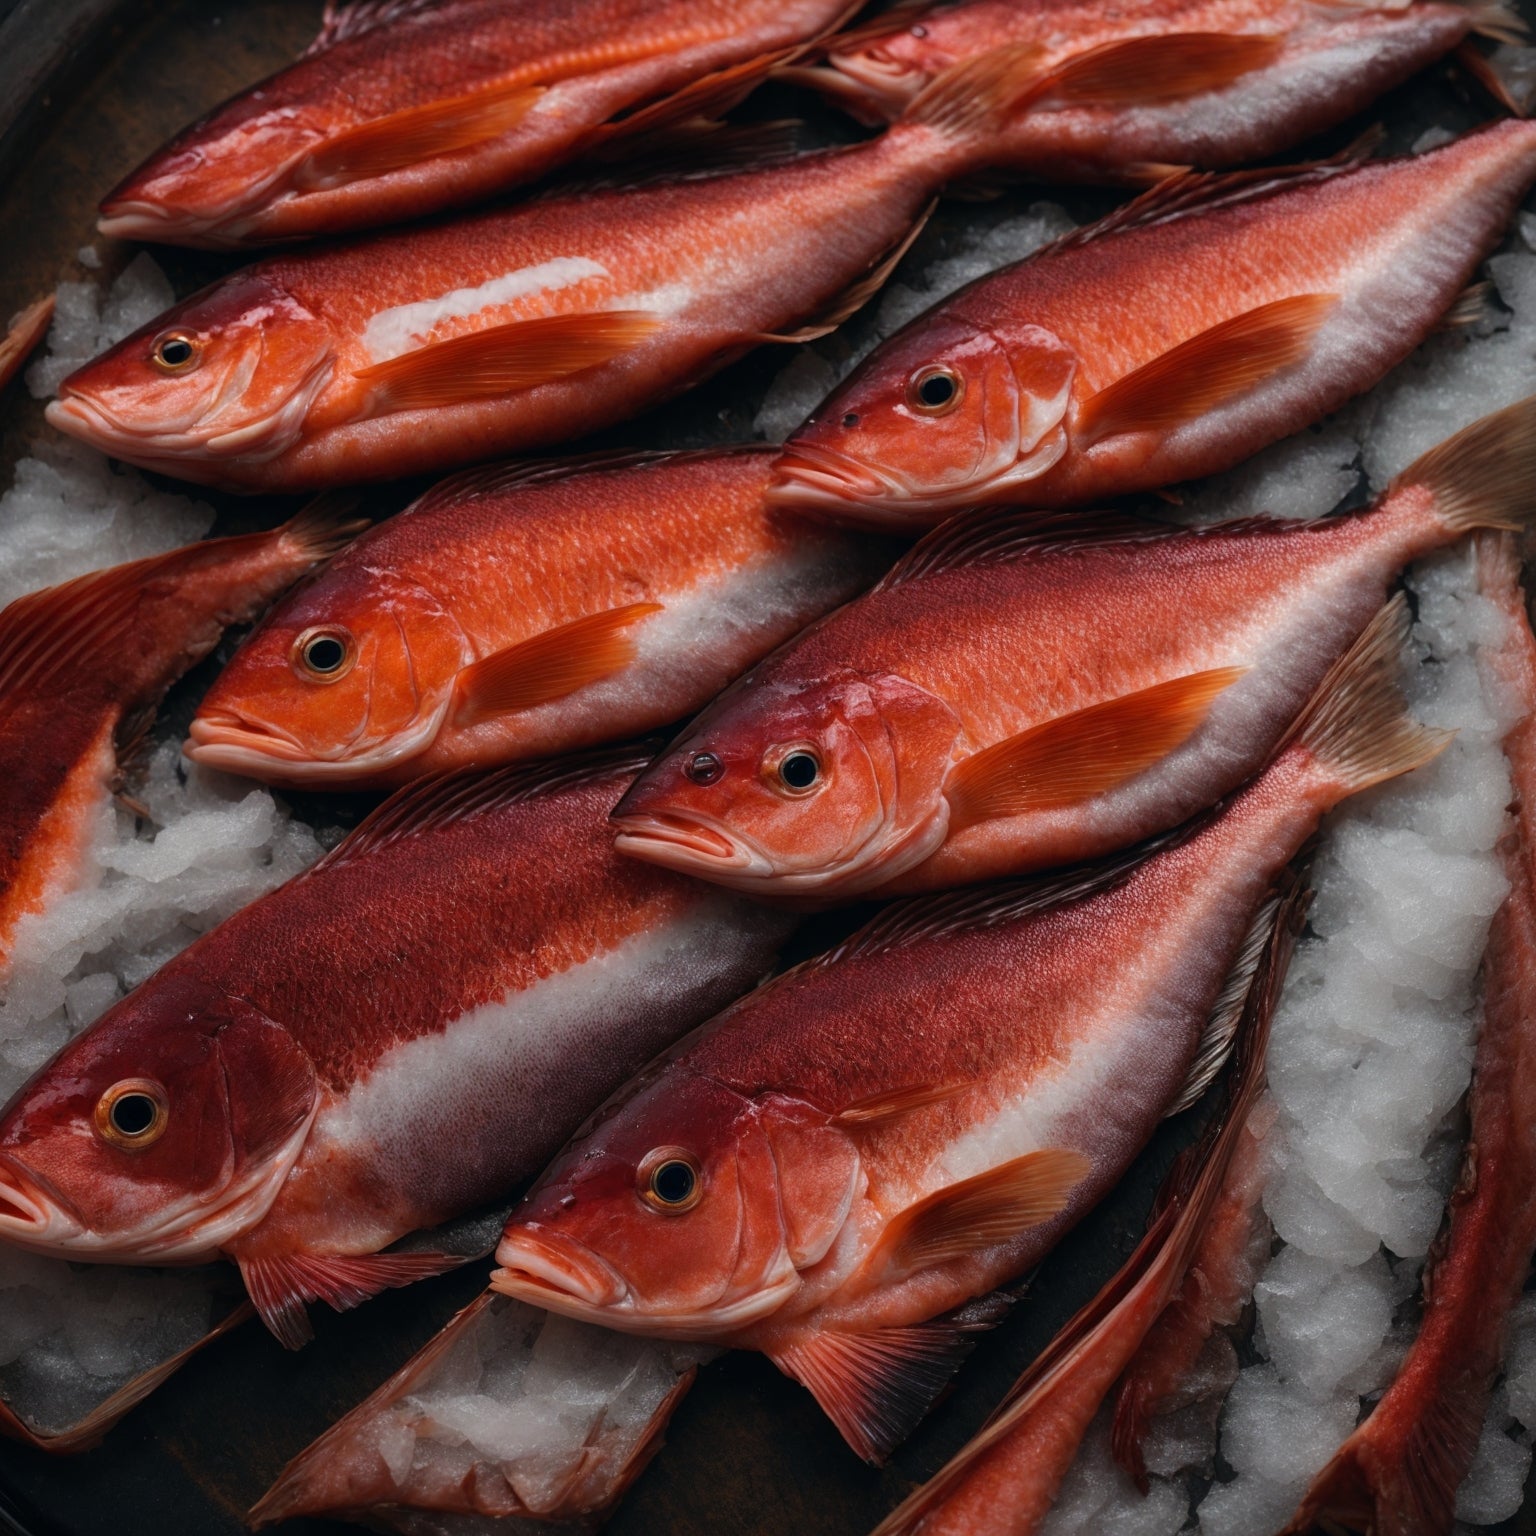 The Science Behind Dry Aging Fish: What Makes It Special?